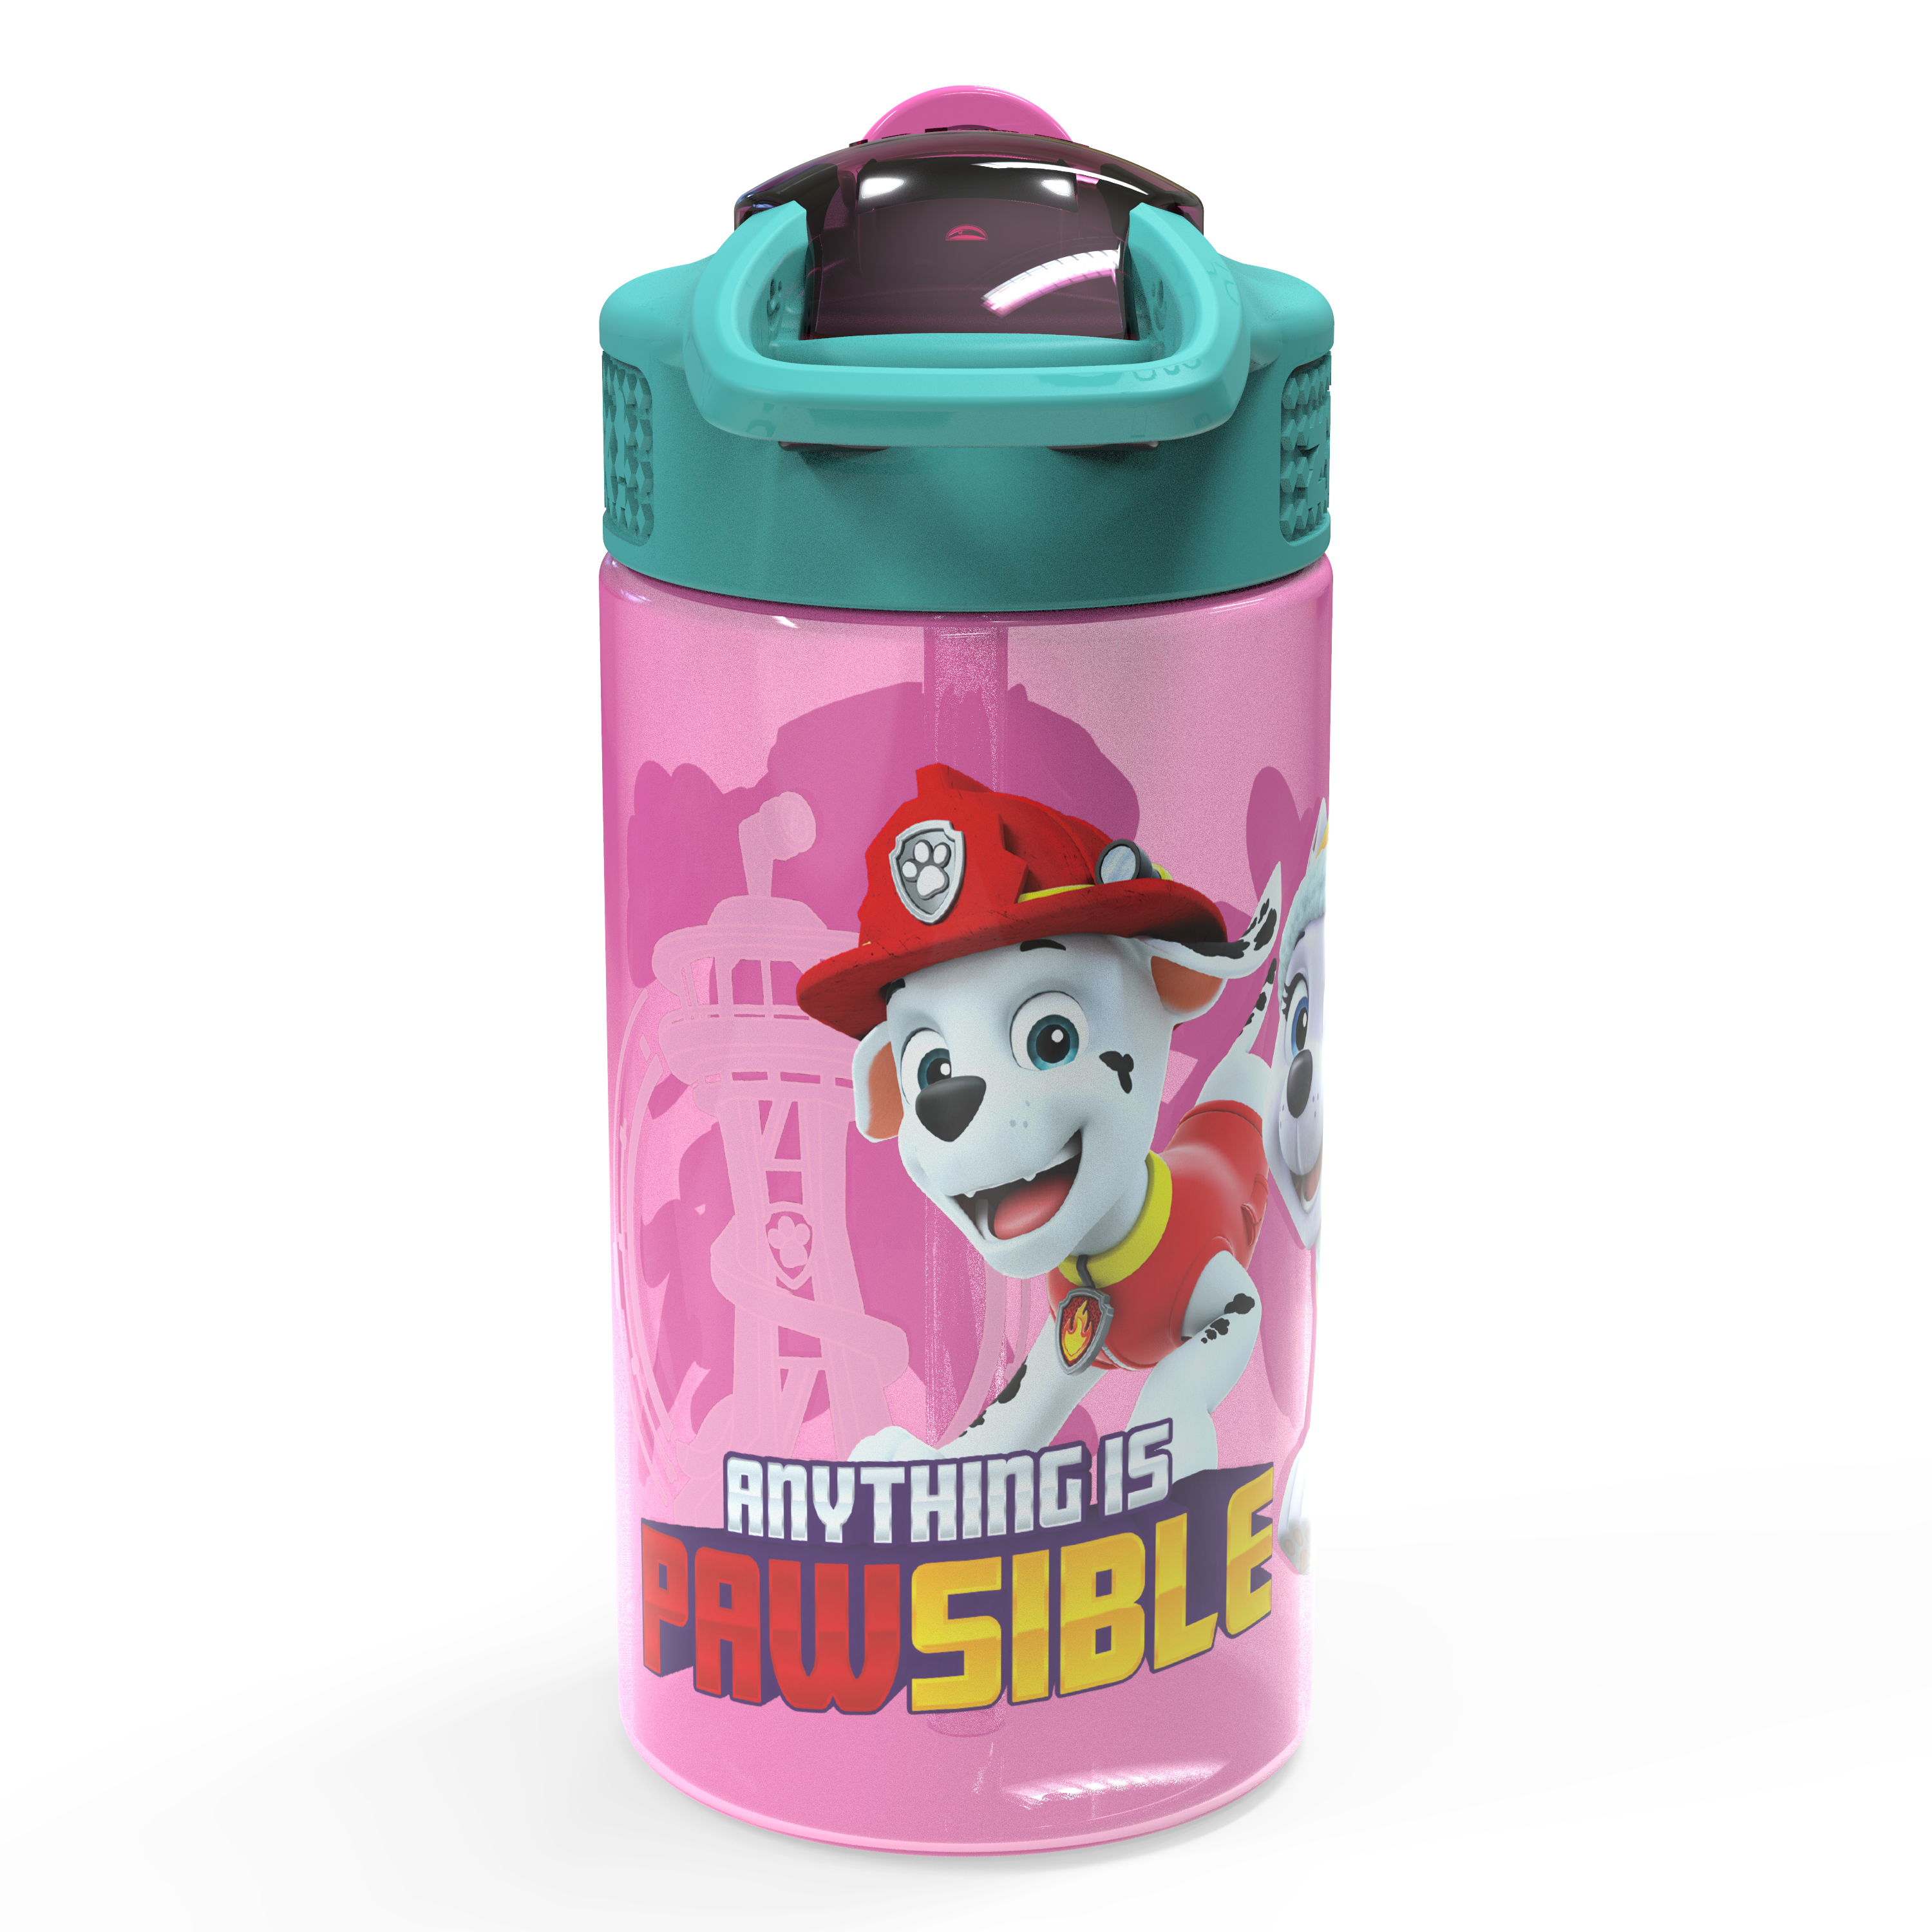 Paw Patrol 16 ounce Reusable Plastic Water Bottle with Straw, Skye, 2-piece set slideshow image 3